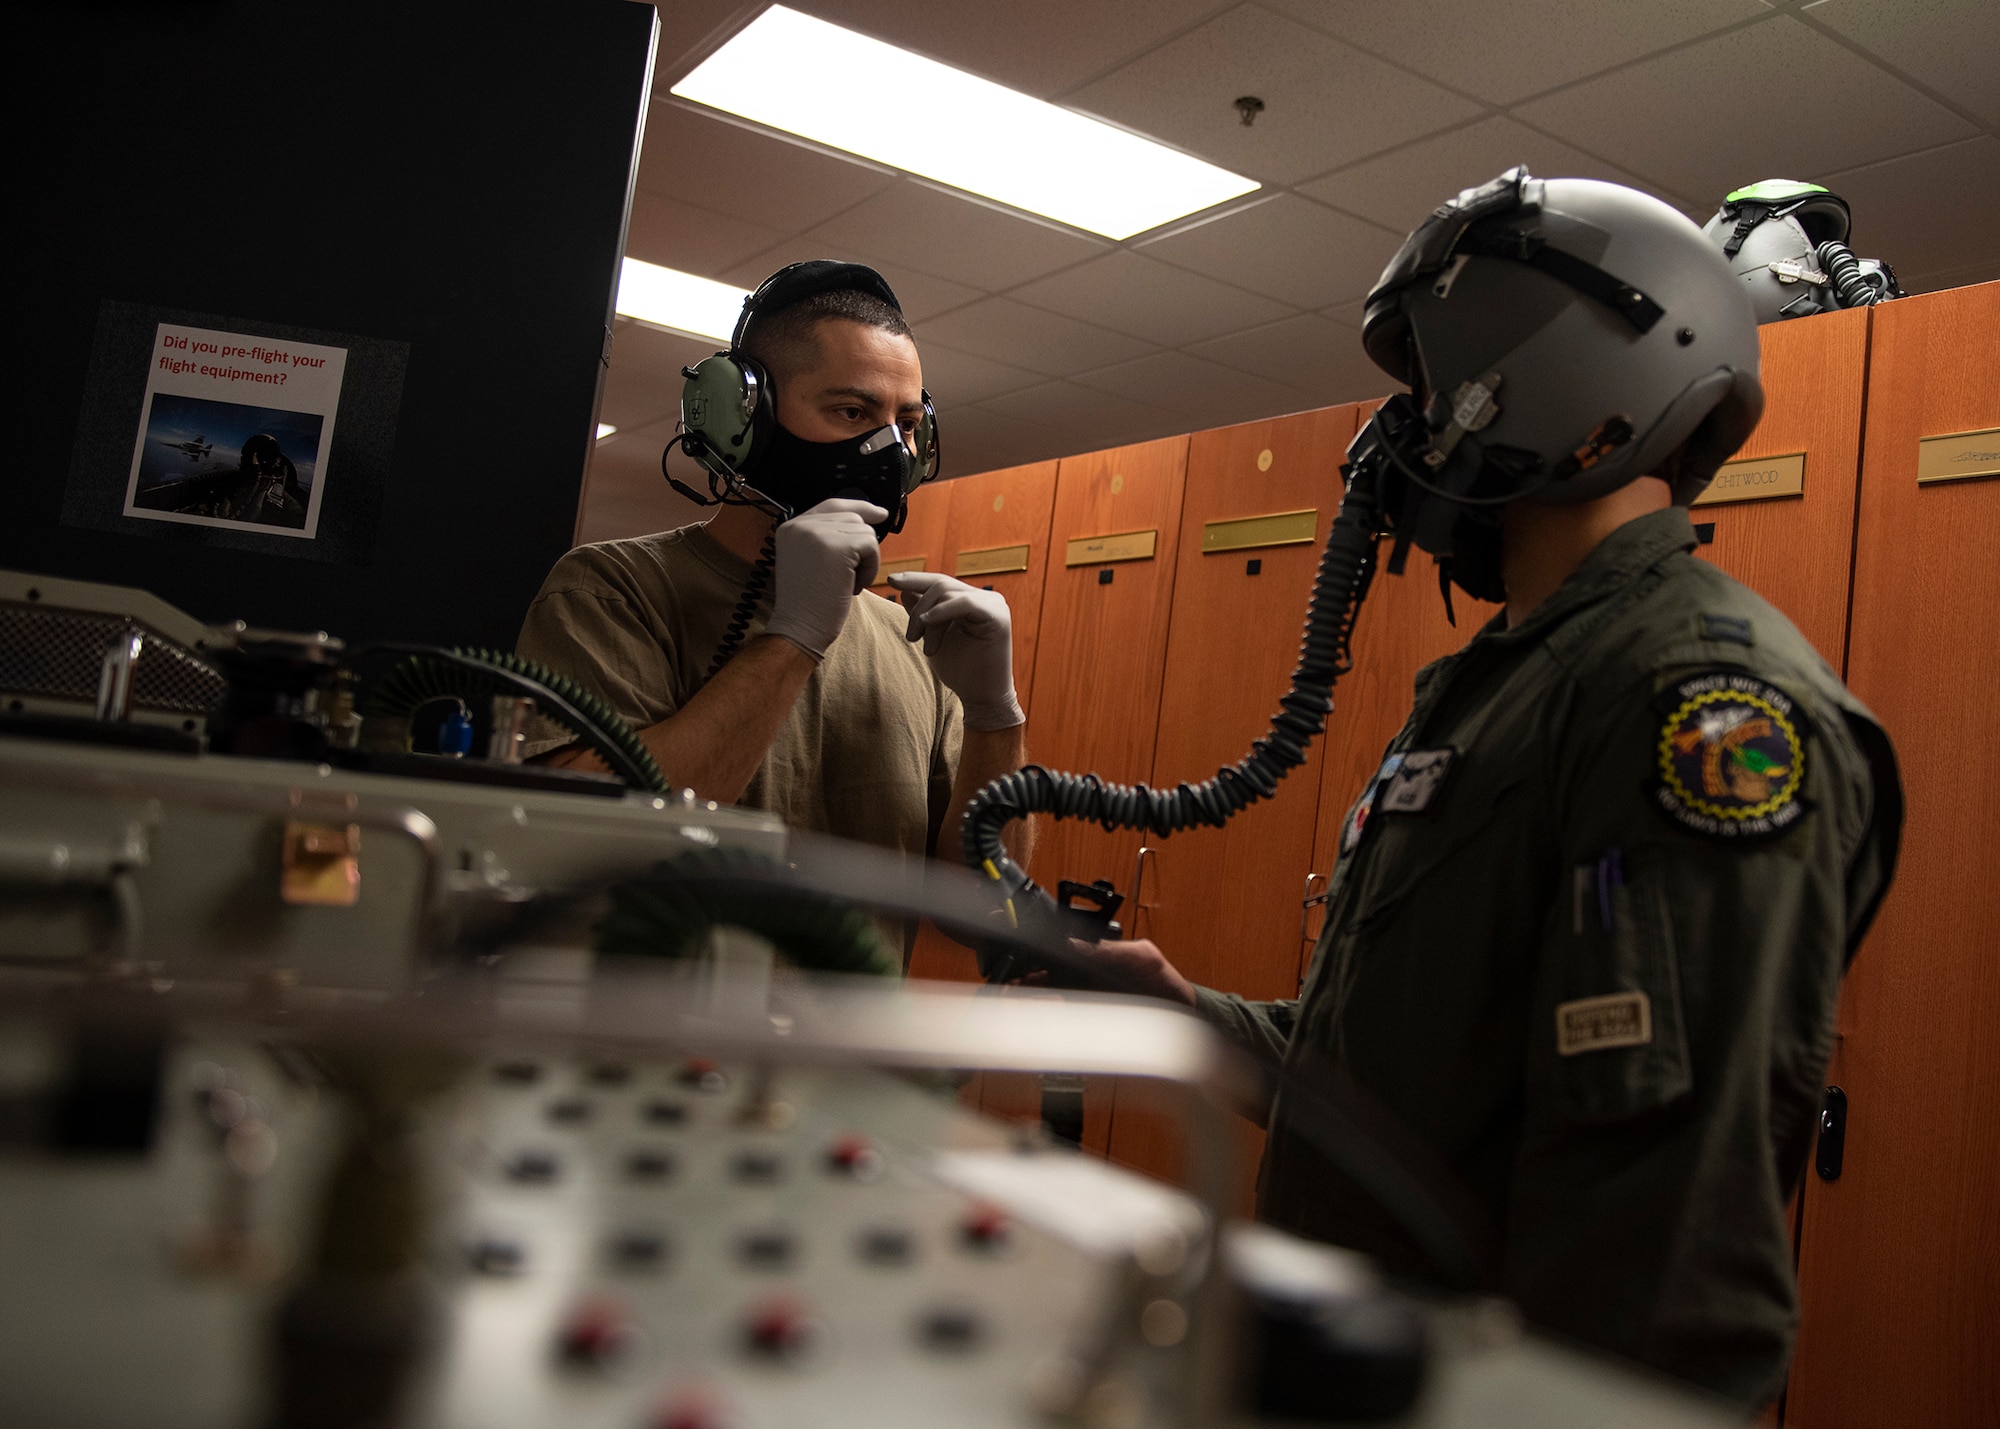 An Airman talks into a headset while another Airman wears a helmet and oxygen mask.